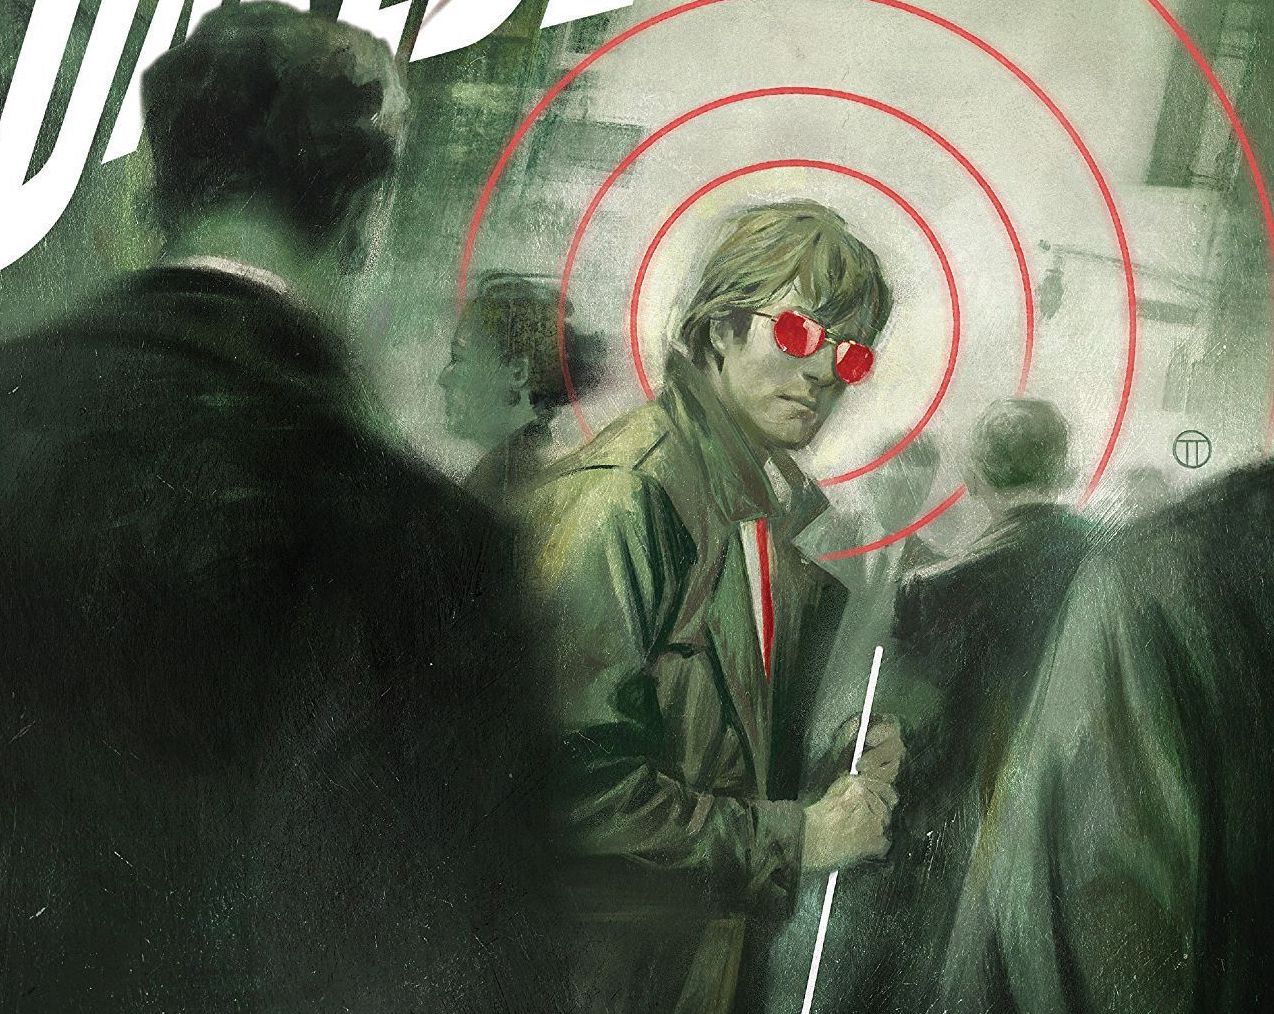 Daredevil #6 review: Welcome to Hell('s Kitchen)